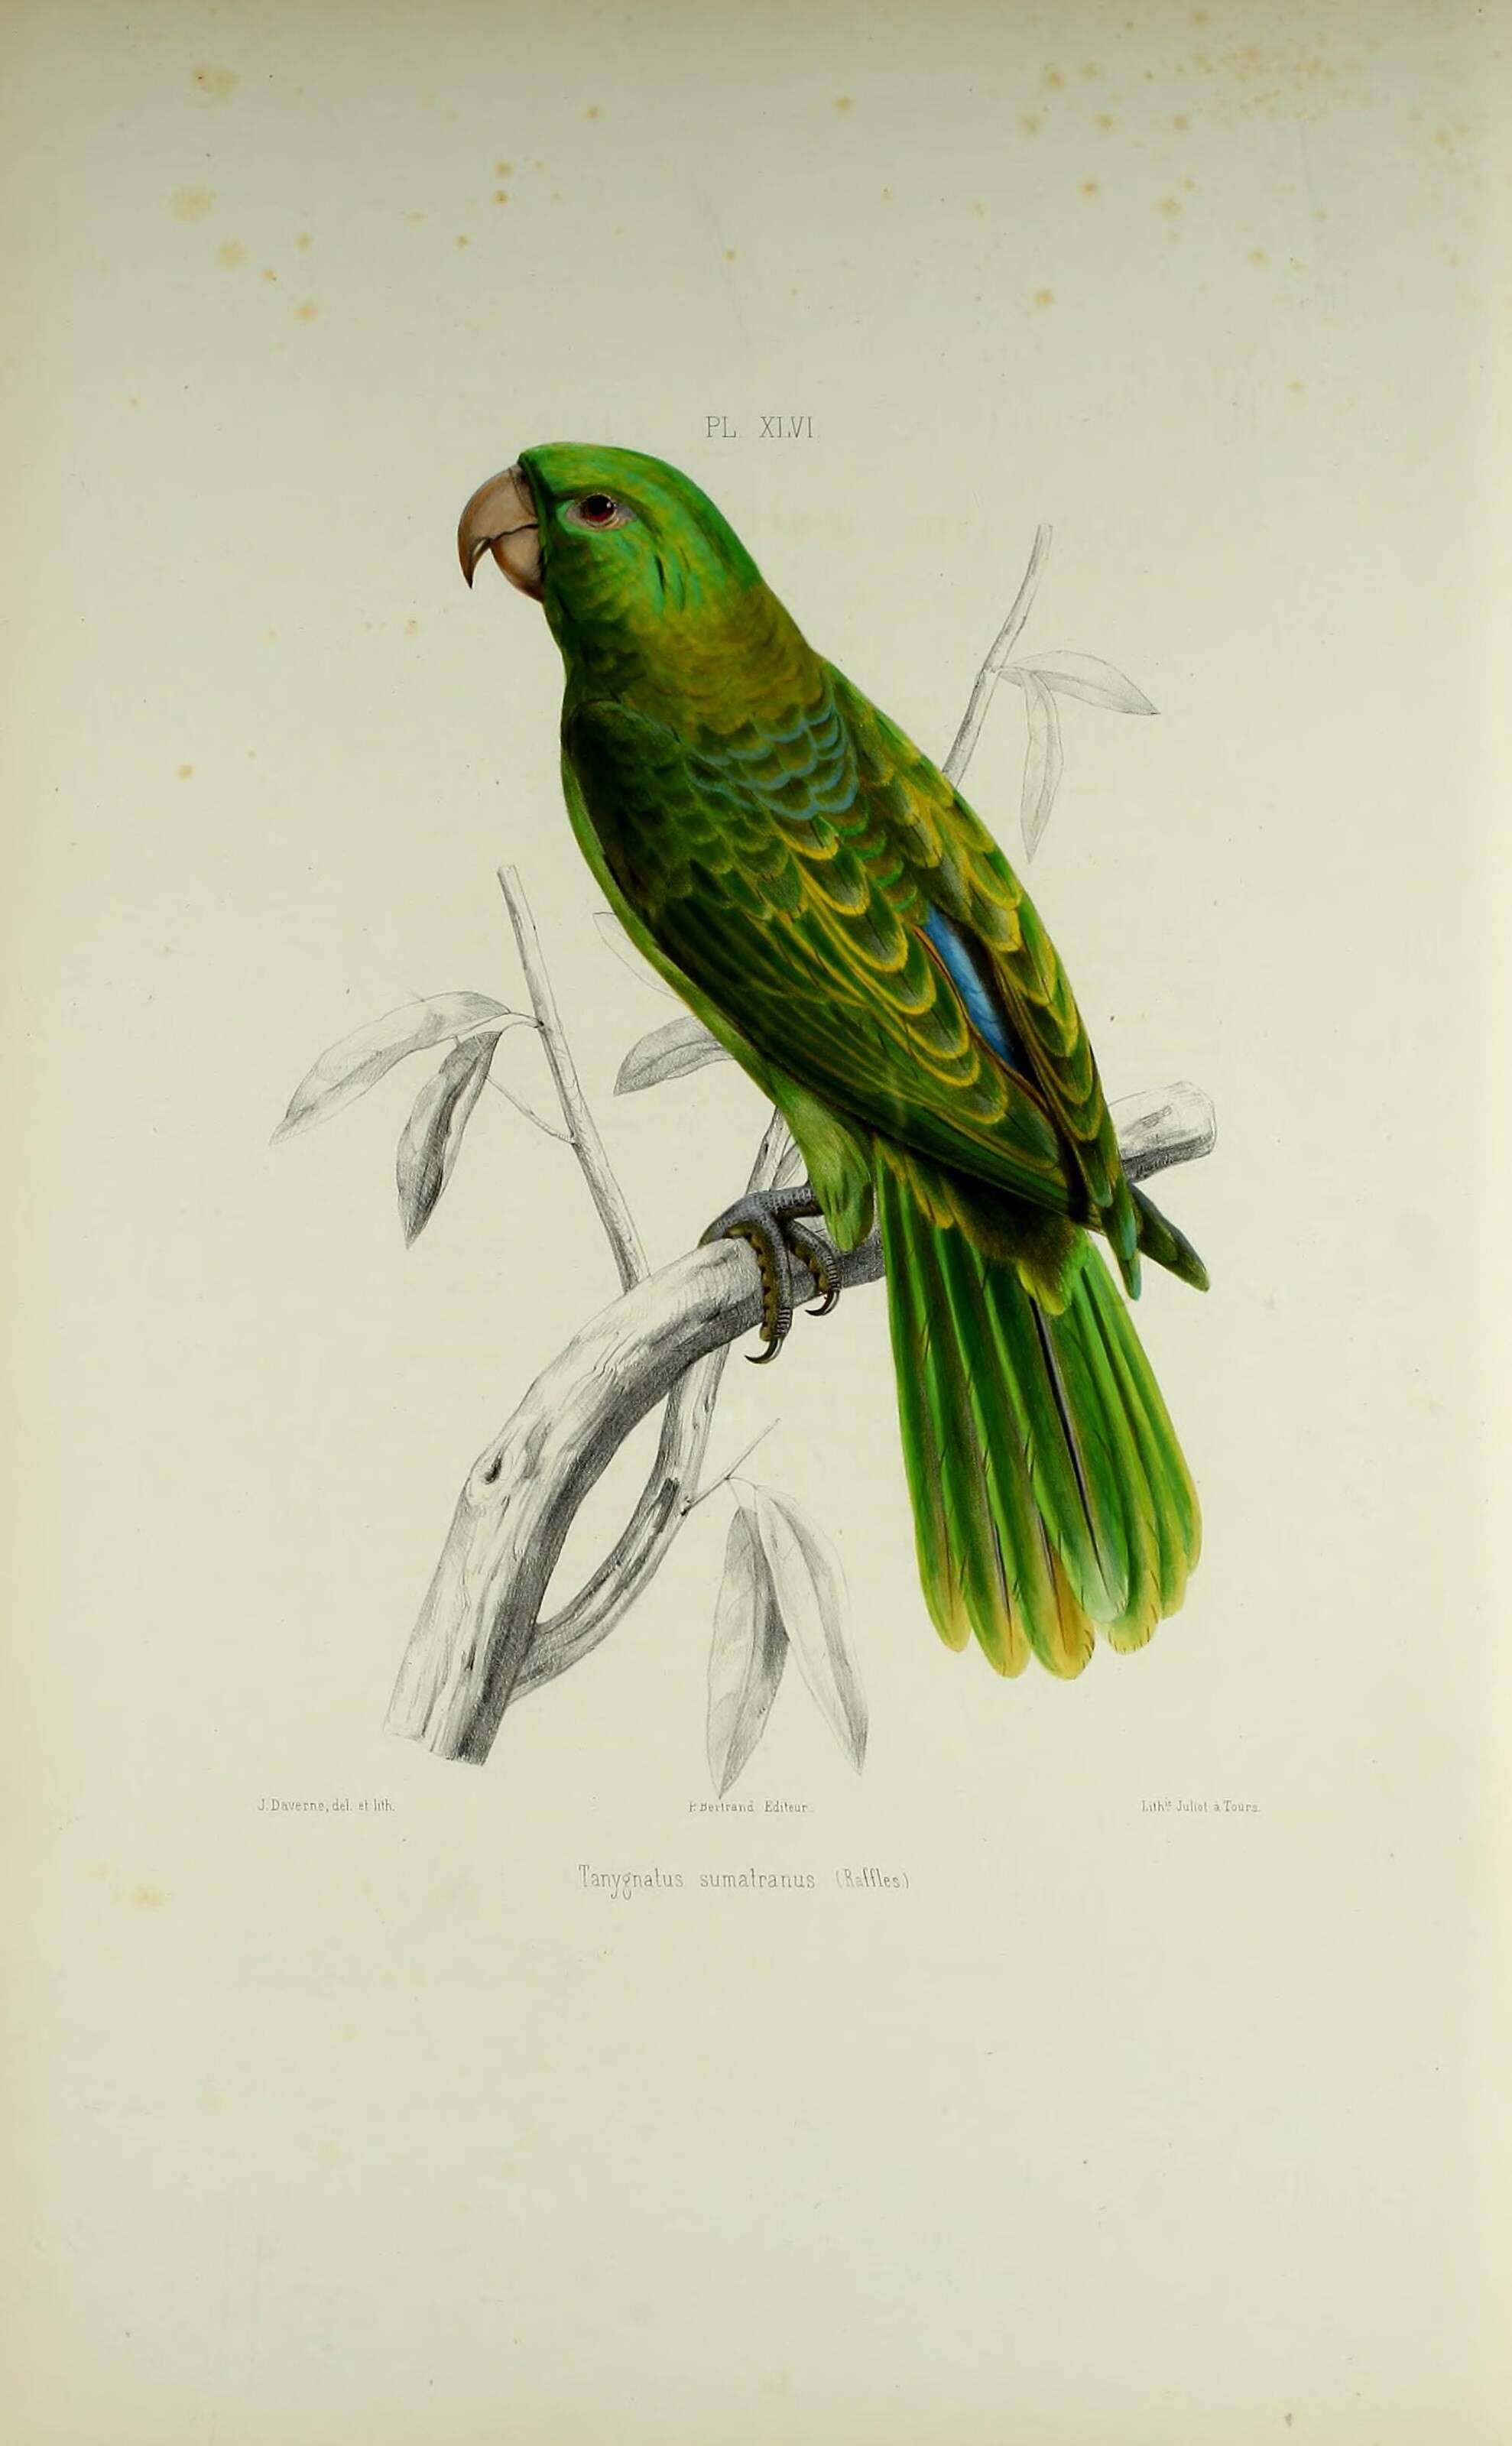 Image of Blue-backed Parrot